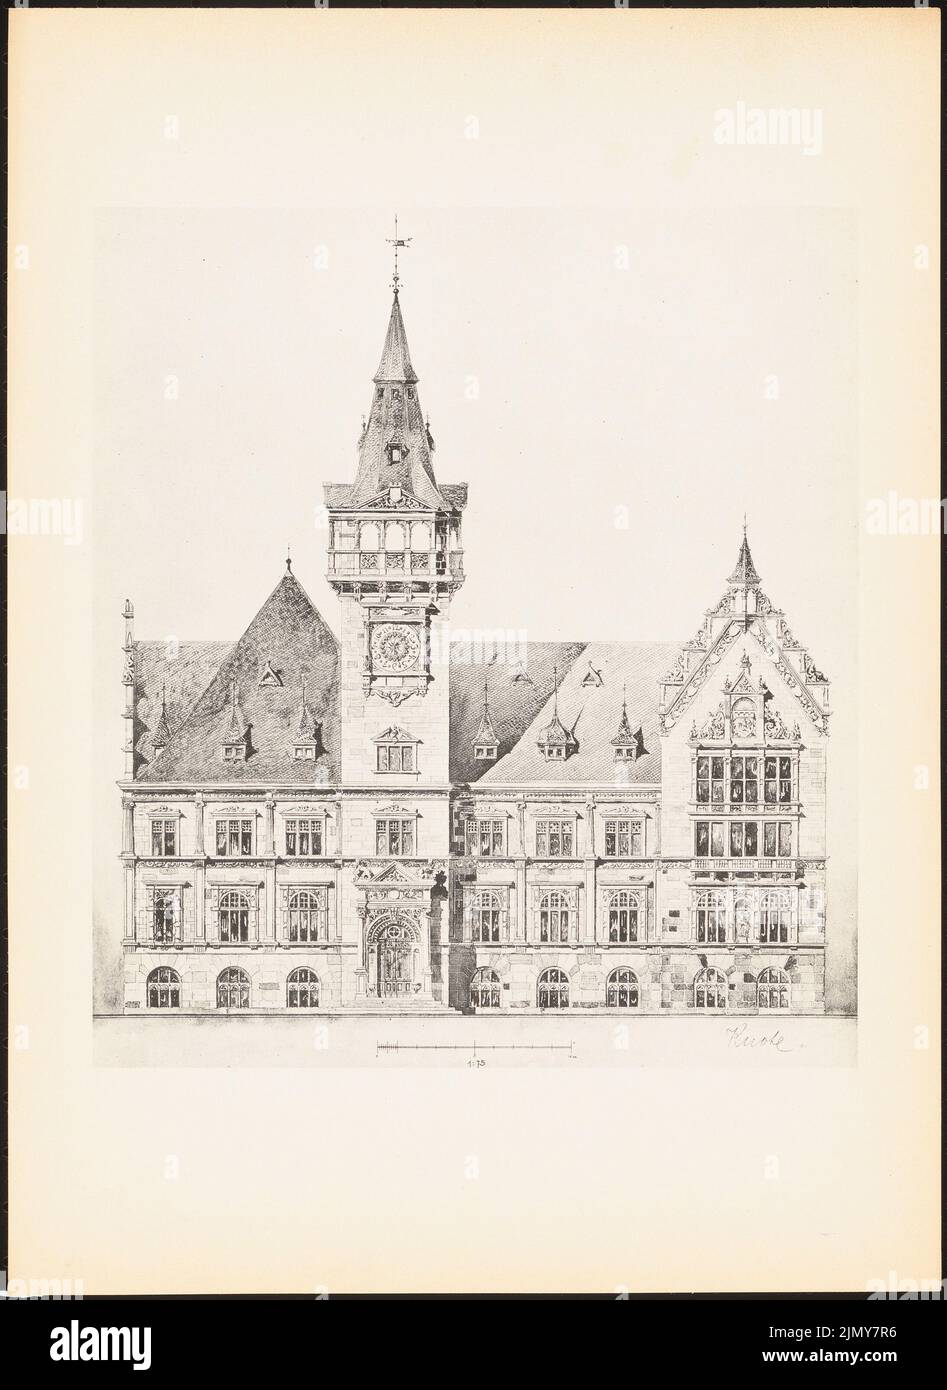 Knote, town hall. (From: Prints of seminar works by the Royal Technical University of Berlin, Vol. I) (1890-1902): View. Print on paper, 33.2 x 24.2 cm (including scan edges) Stock Photo